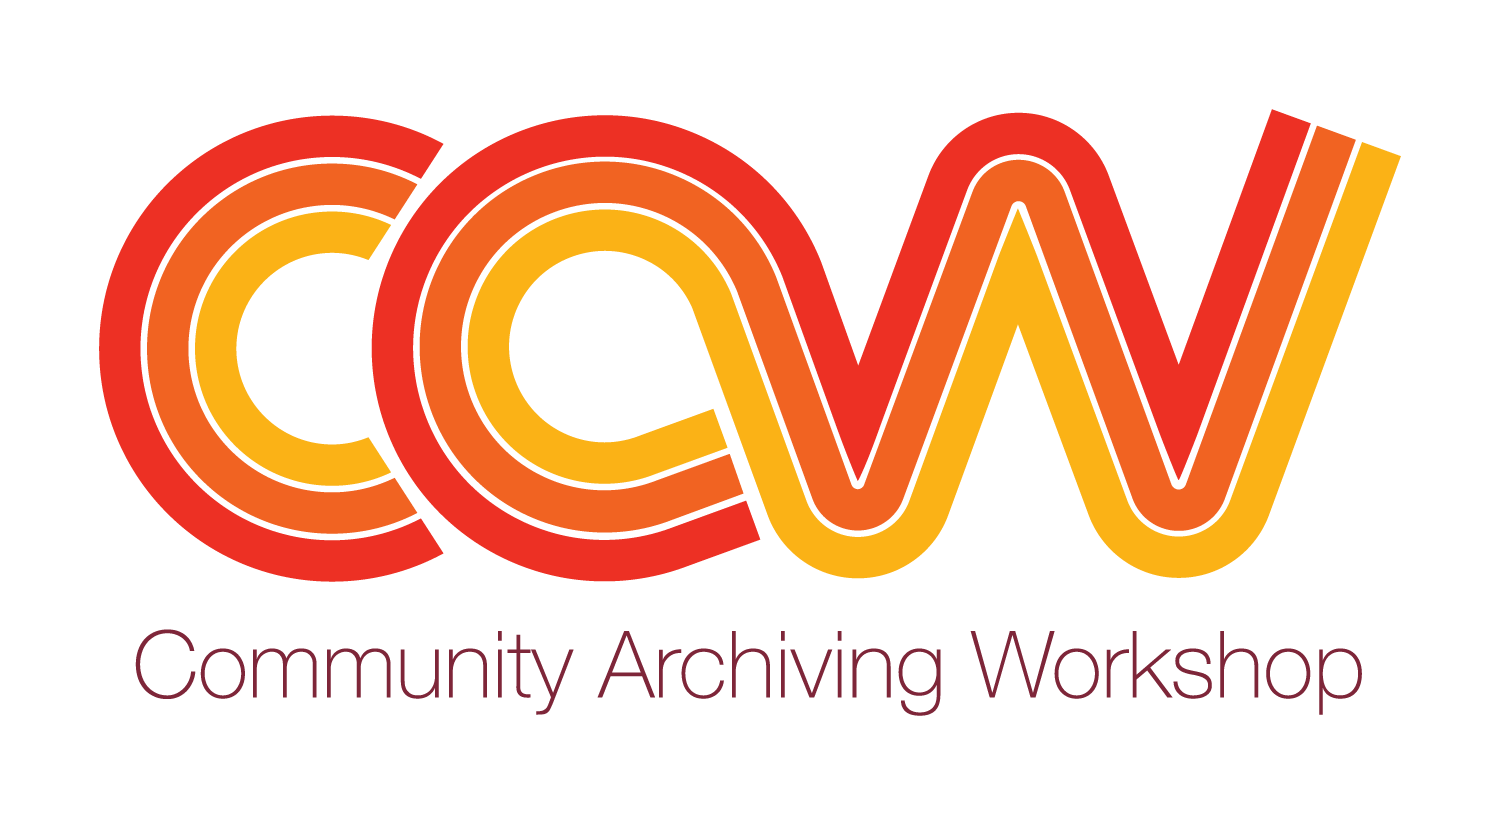 Logo for Community Archiving Workshop in red